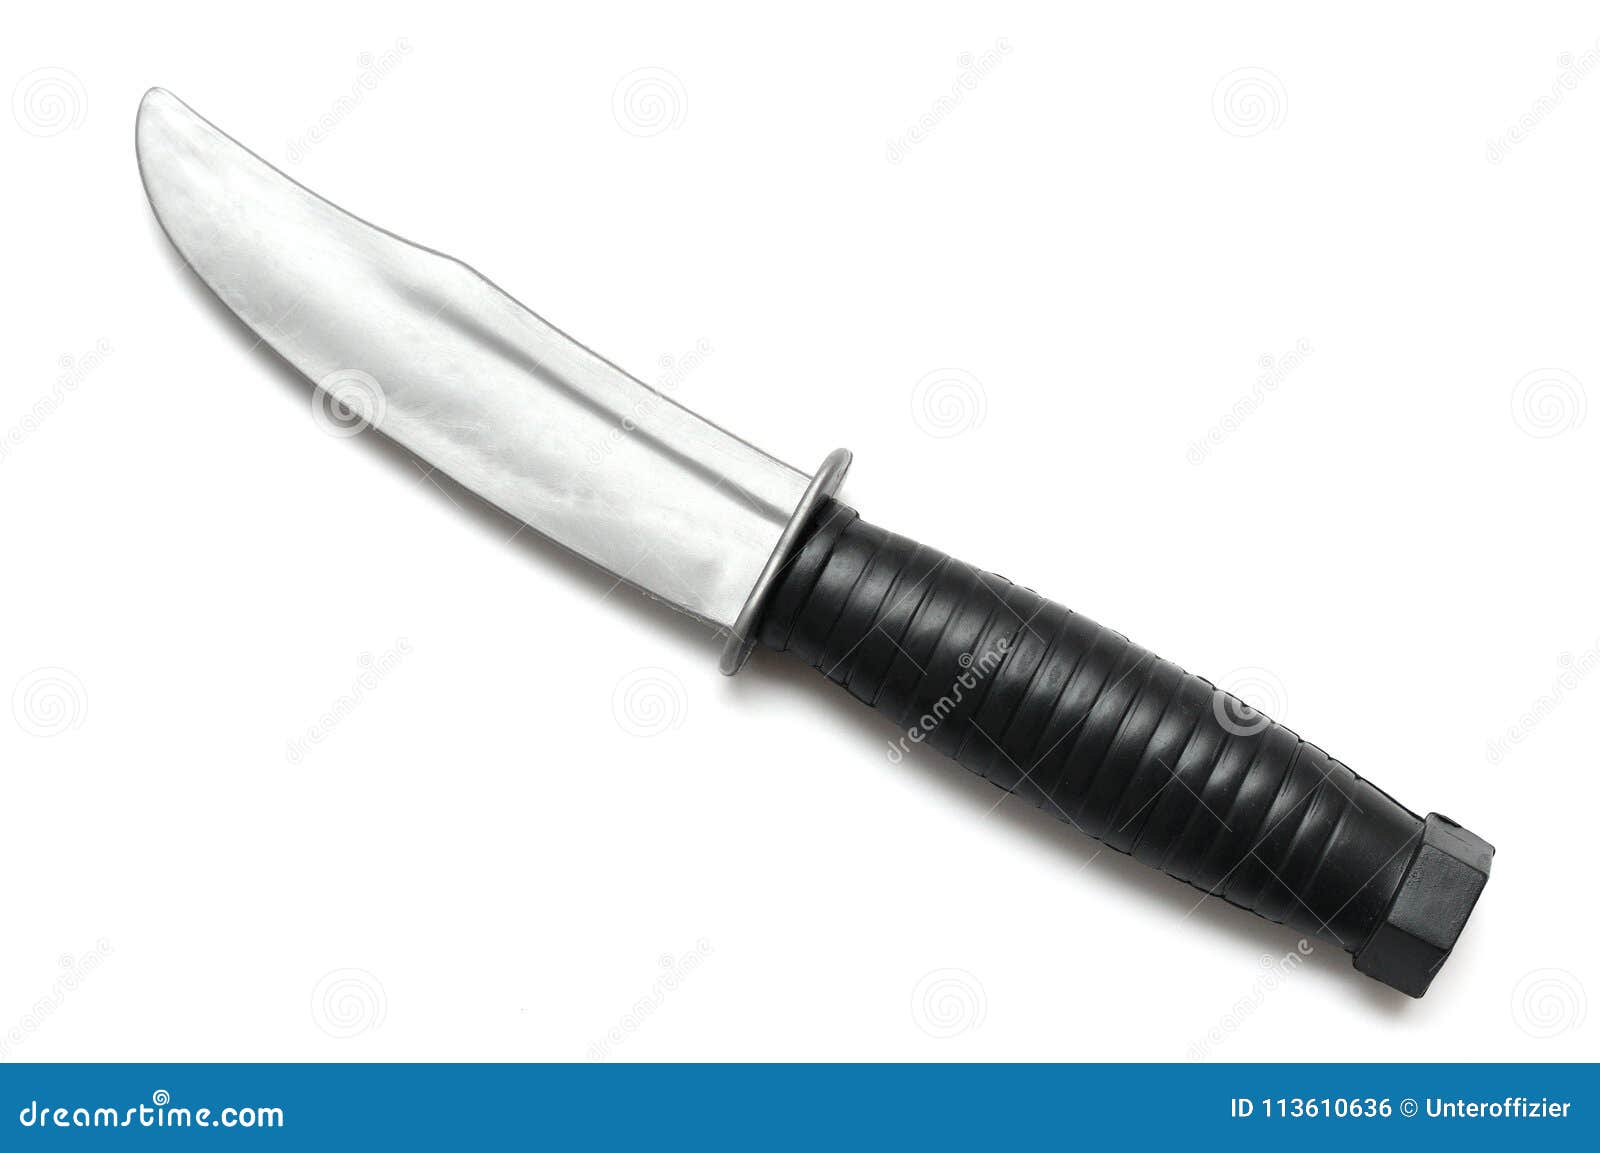 A plastic toy knife stock photo. Image of imagination